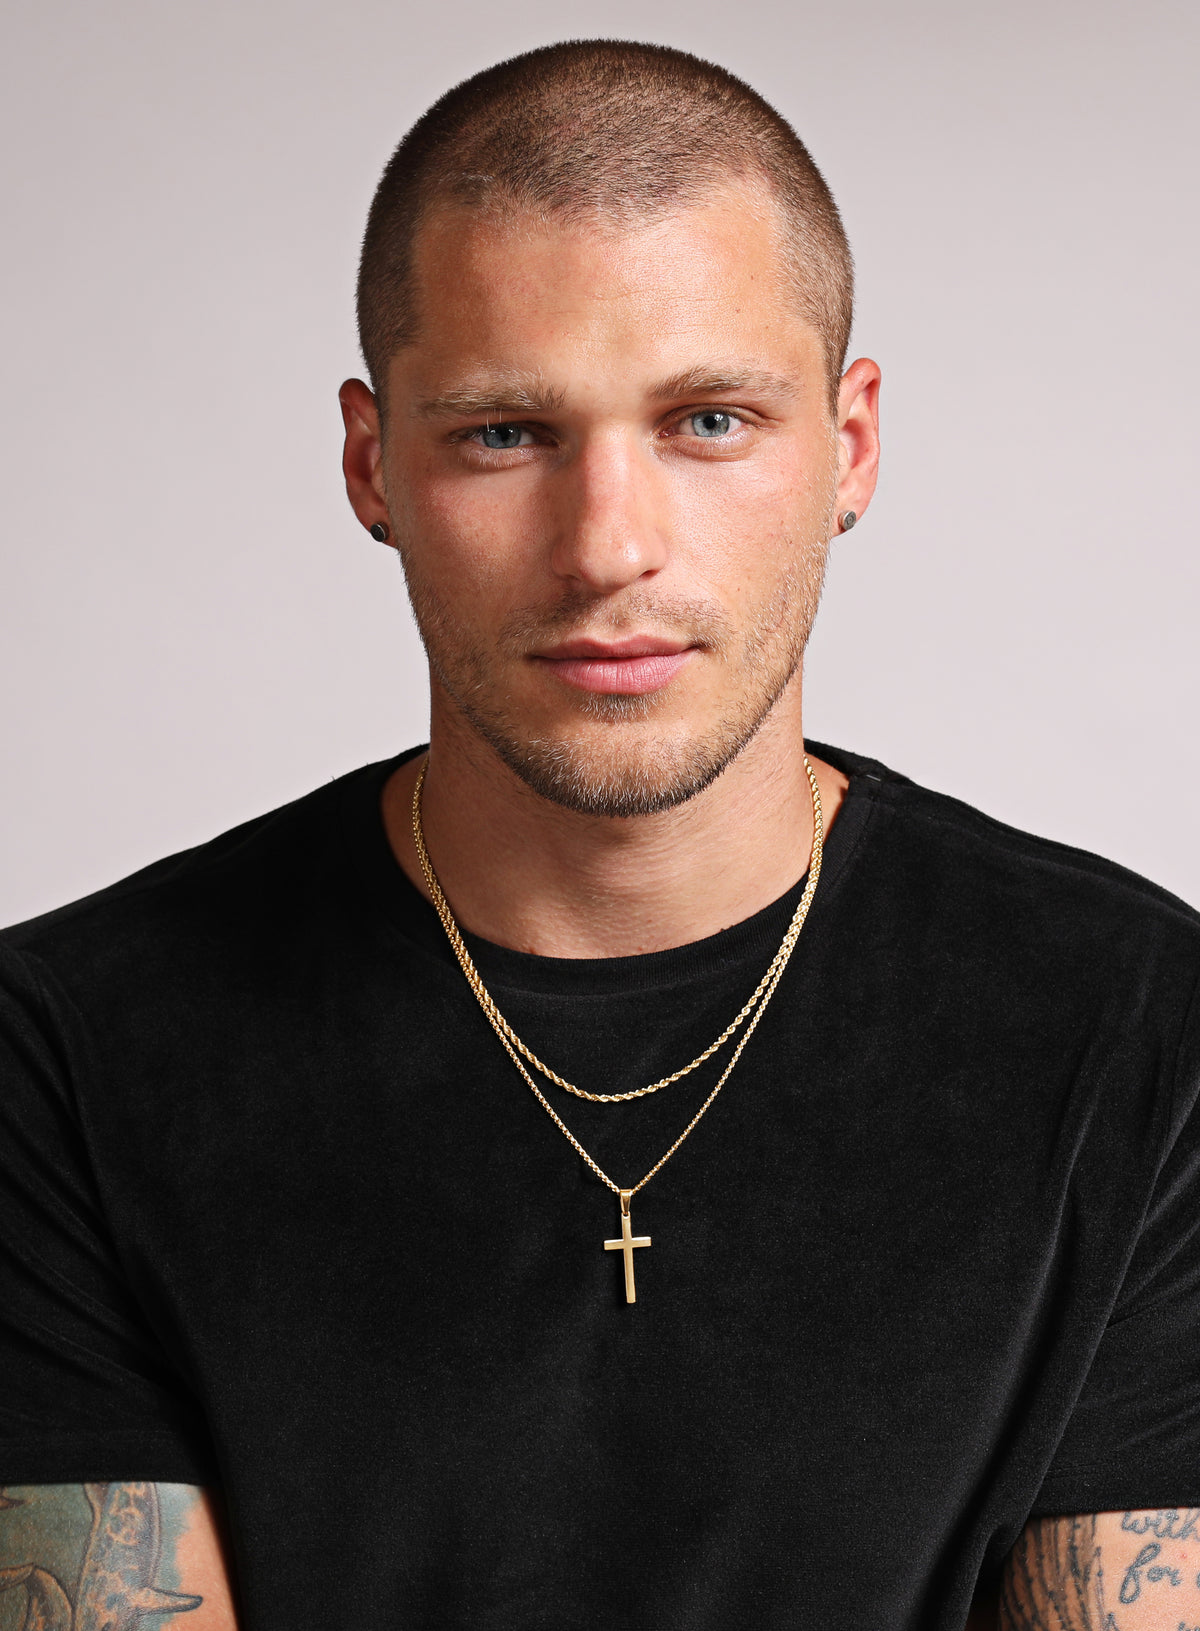 Stainless Steel Rope Chain Necklace for Men — WE ARE ALL SMITH